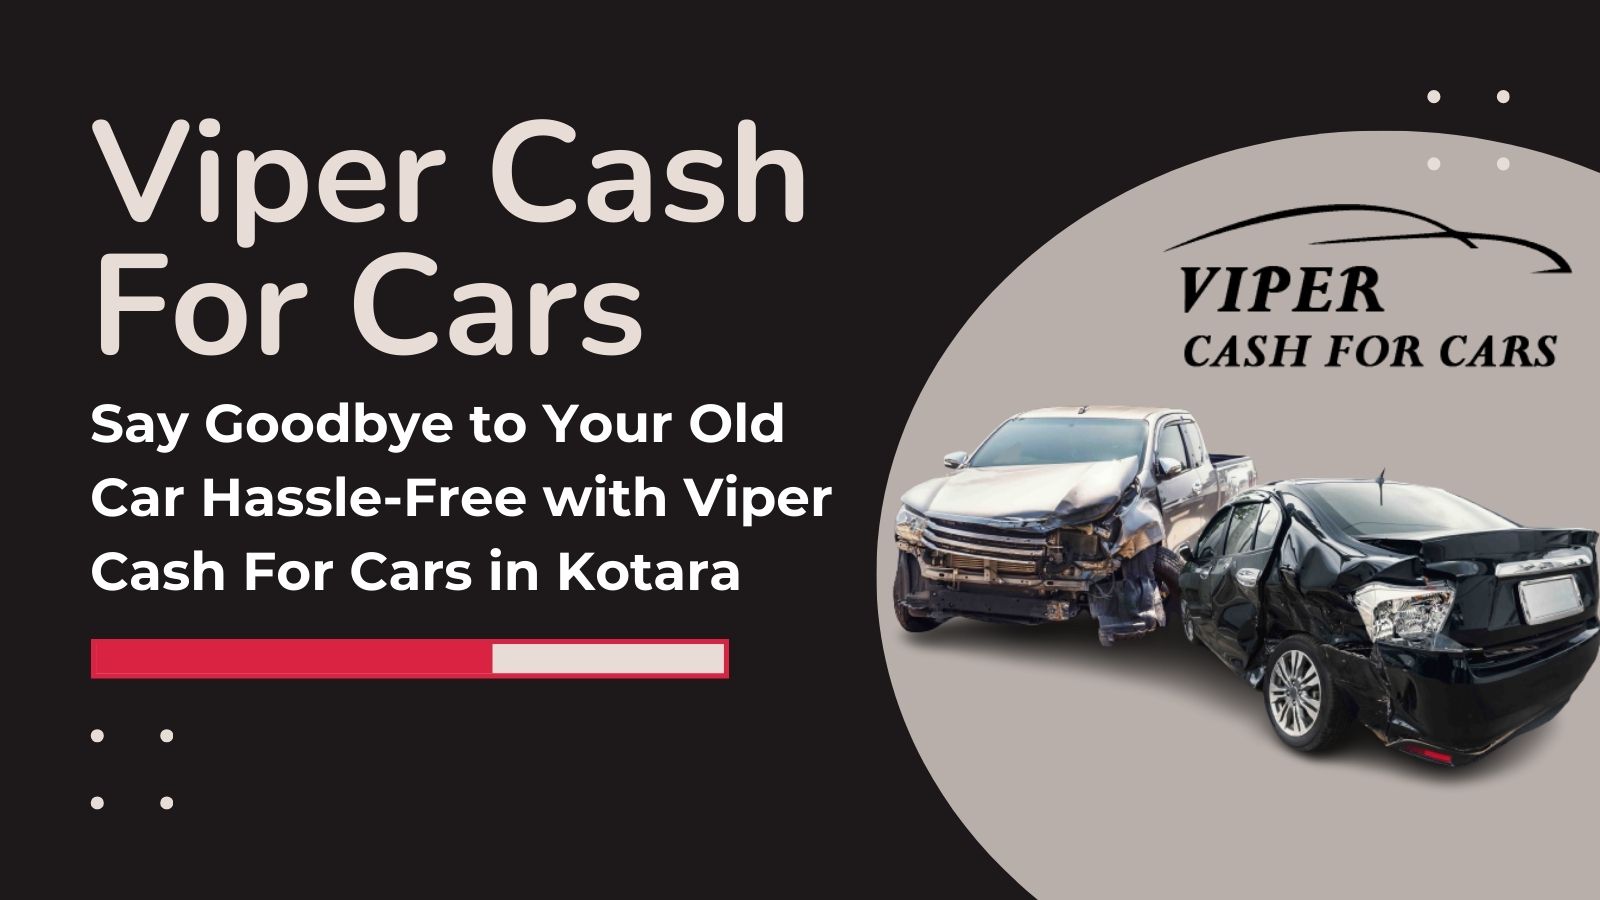 Say Goodbye to Your Old Car Hassle-Free with Viper Cash For Cars in Kotara